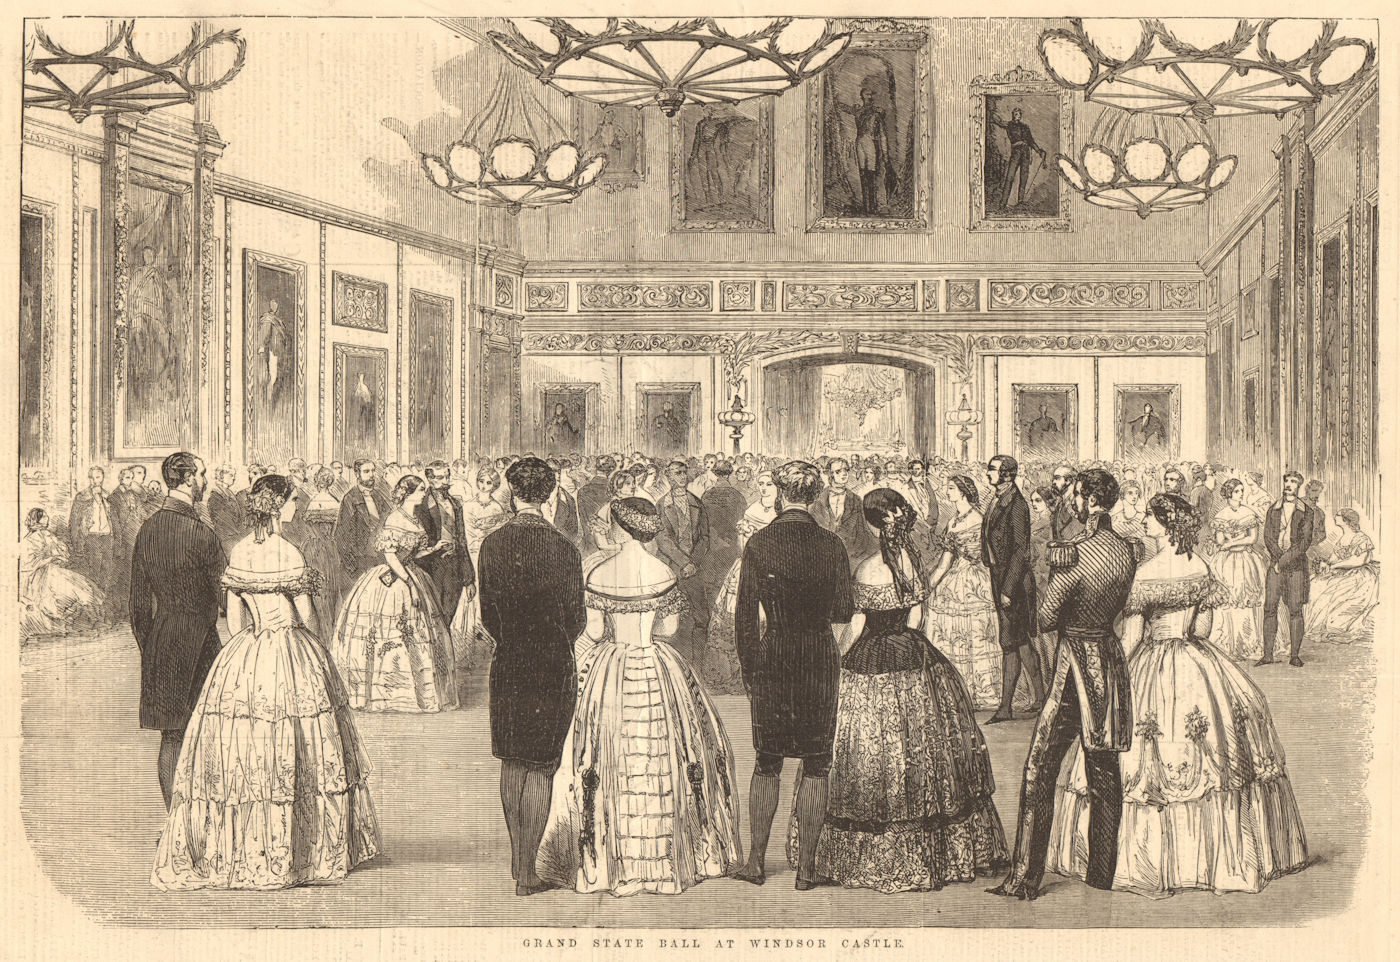 Associate Product Grand state ball at Windsor Castle. Berkshire. Society 1855 antique ILN page